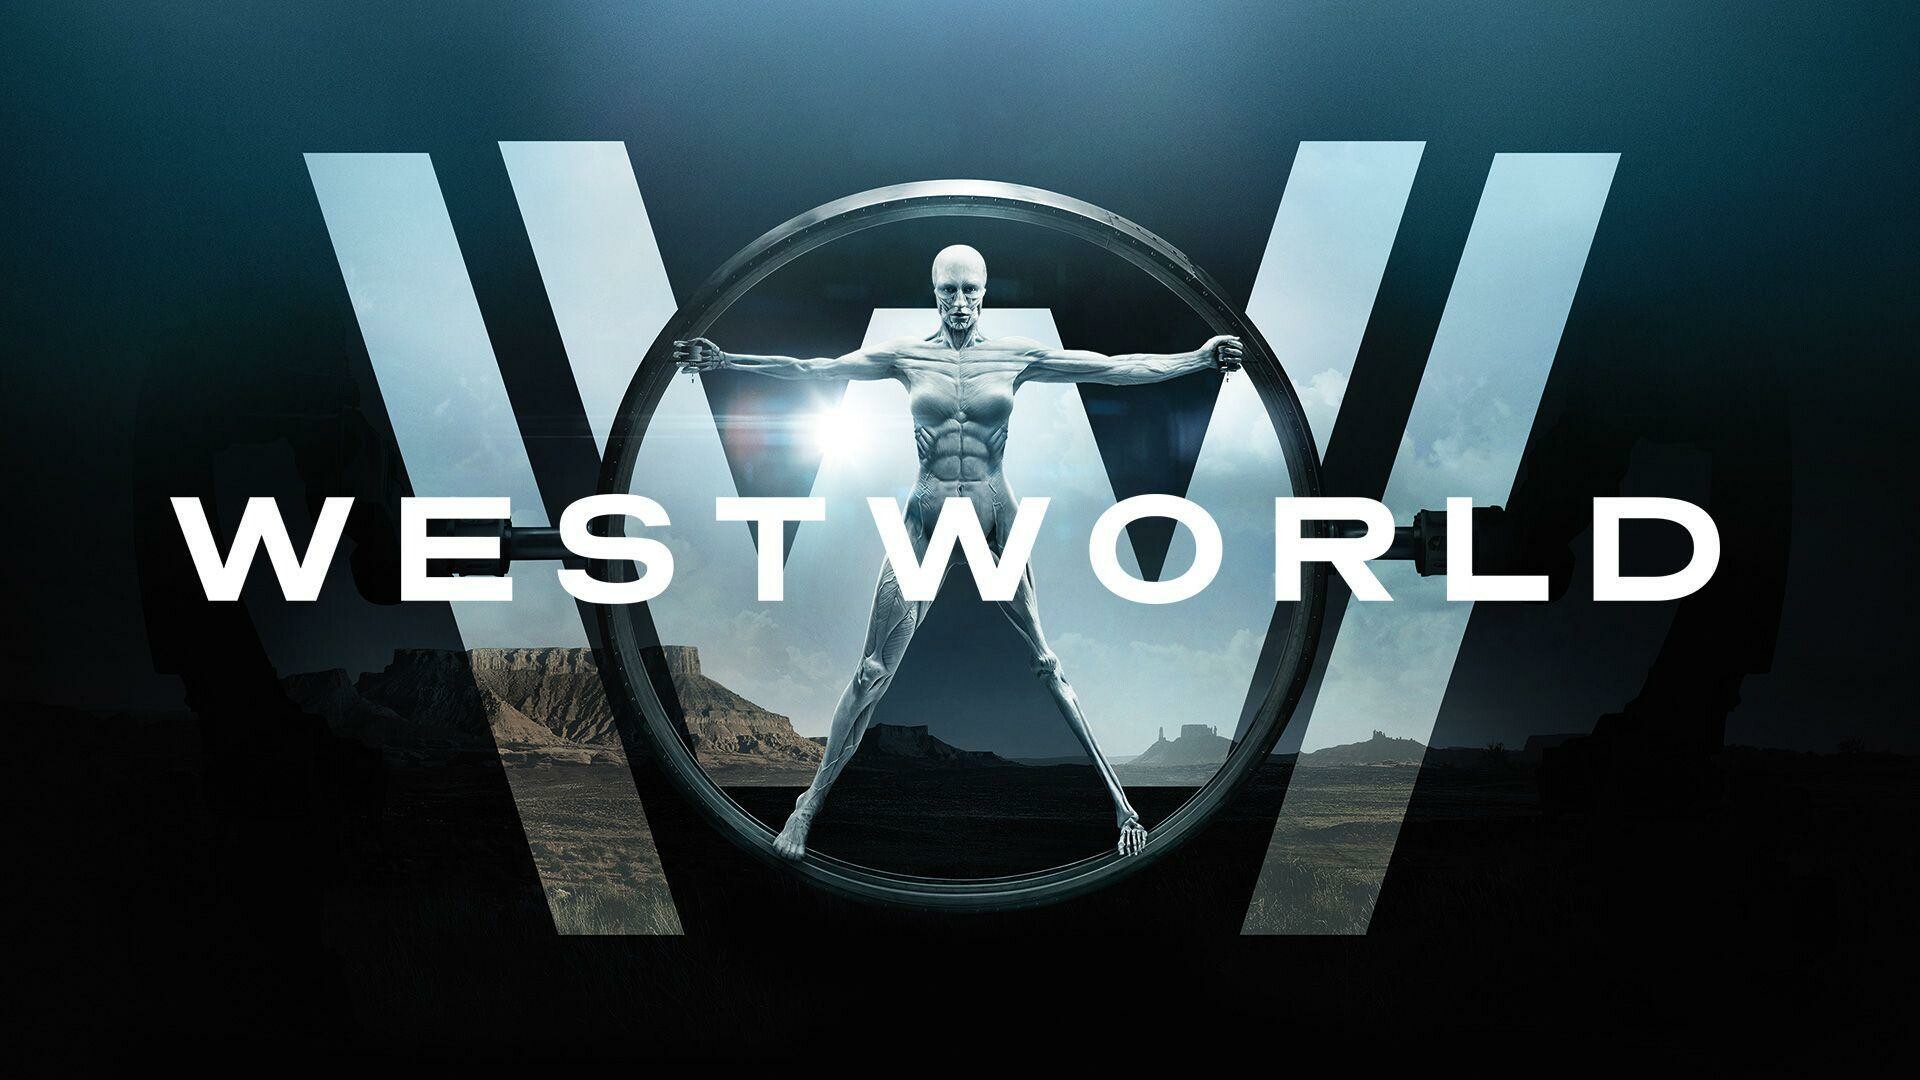 Westworld: Based on the 1973 feature film directorial debut by Michael Crichton. 1920x1080 Full HD Background.